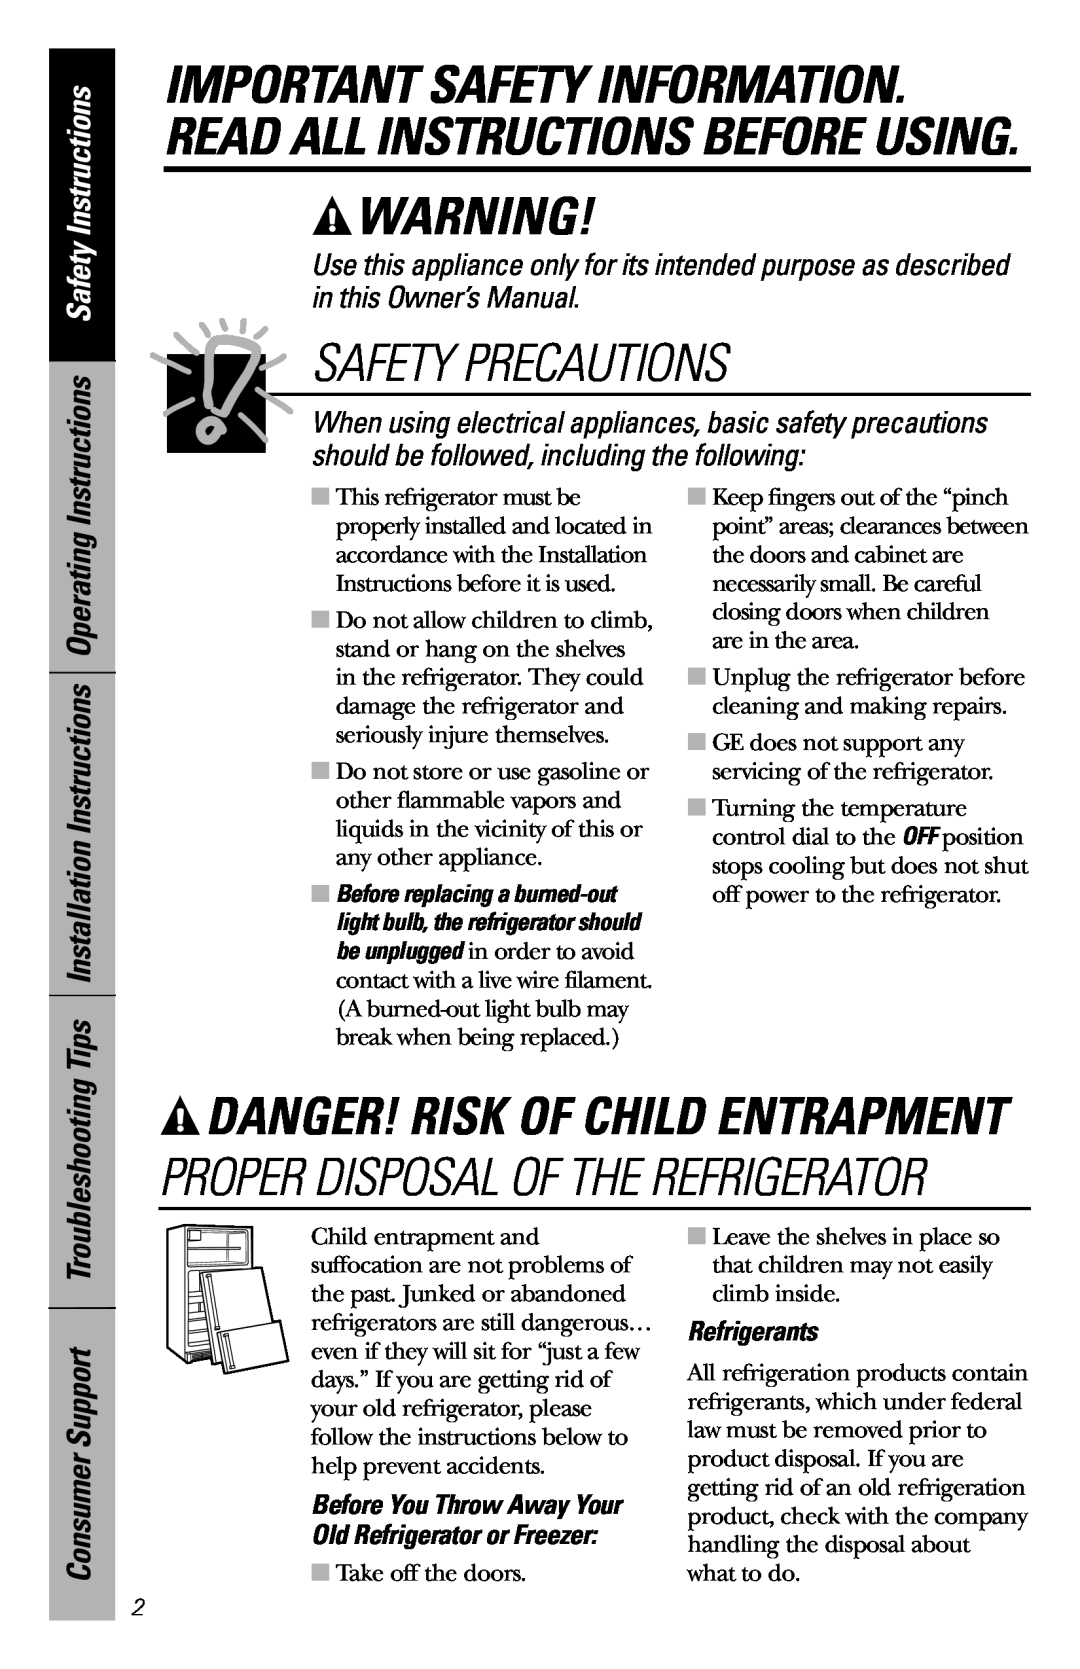 GE 49-60327 Safety Precautions, Danger! Risk Of Child Entrapment, Consumer Support, Instructions Safety Instructions 